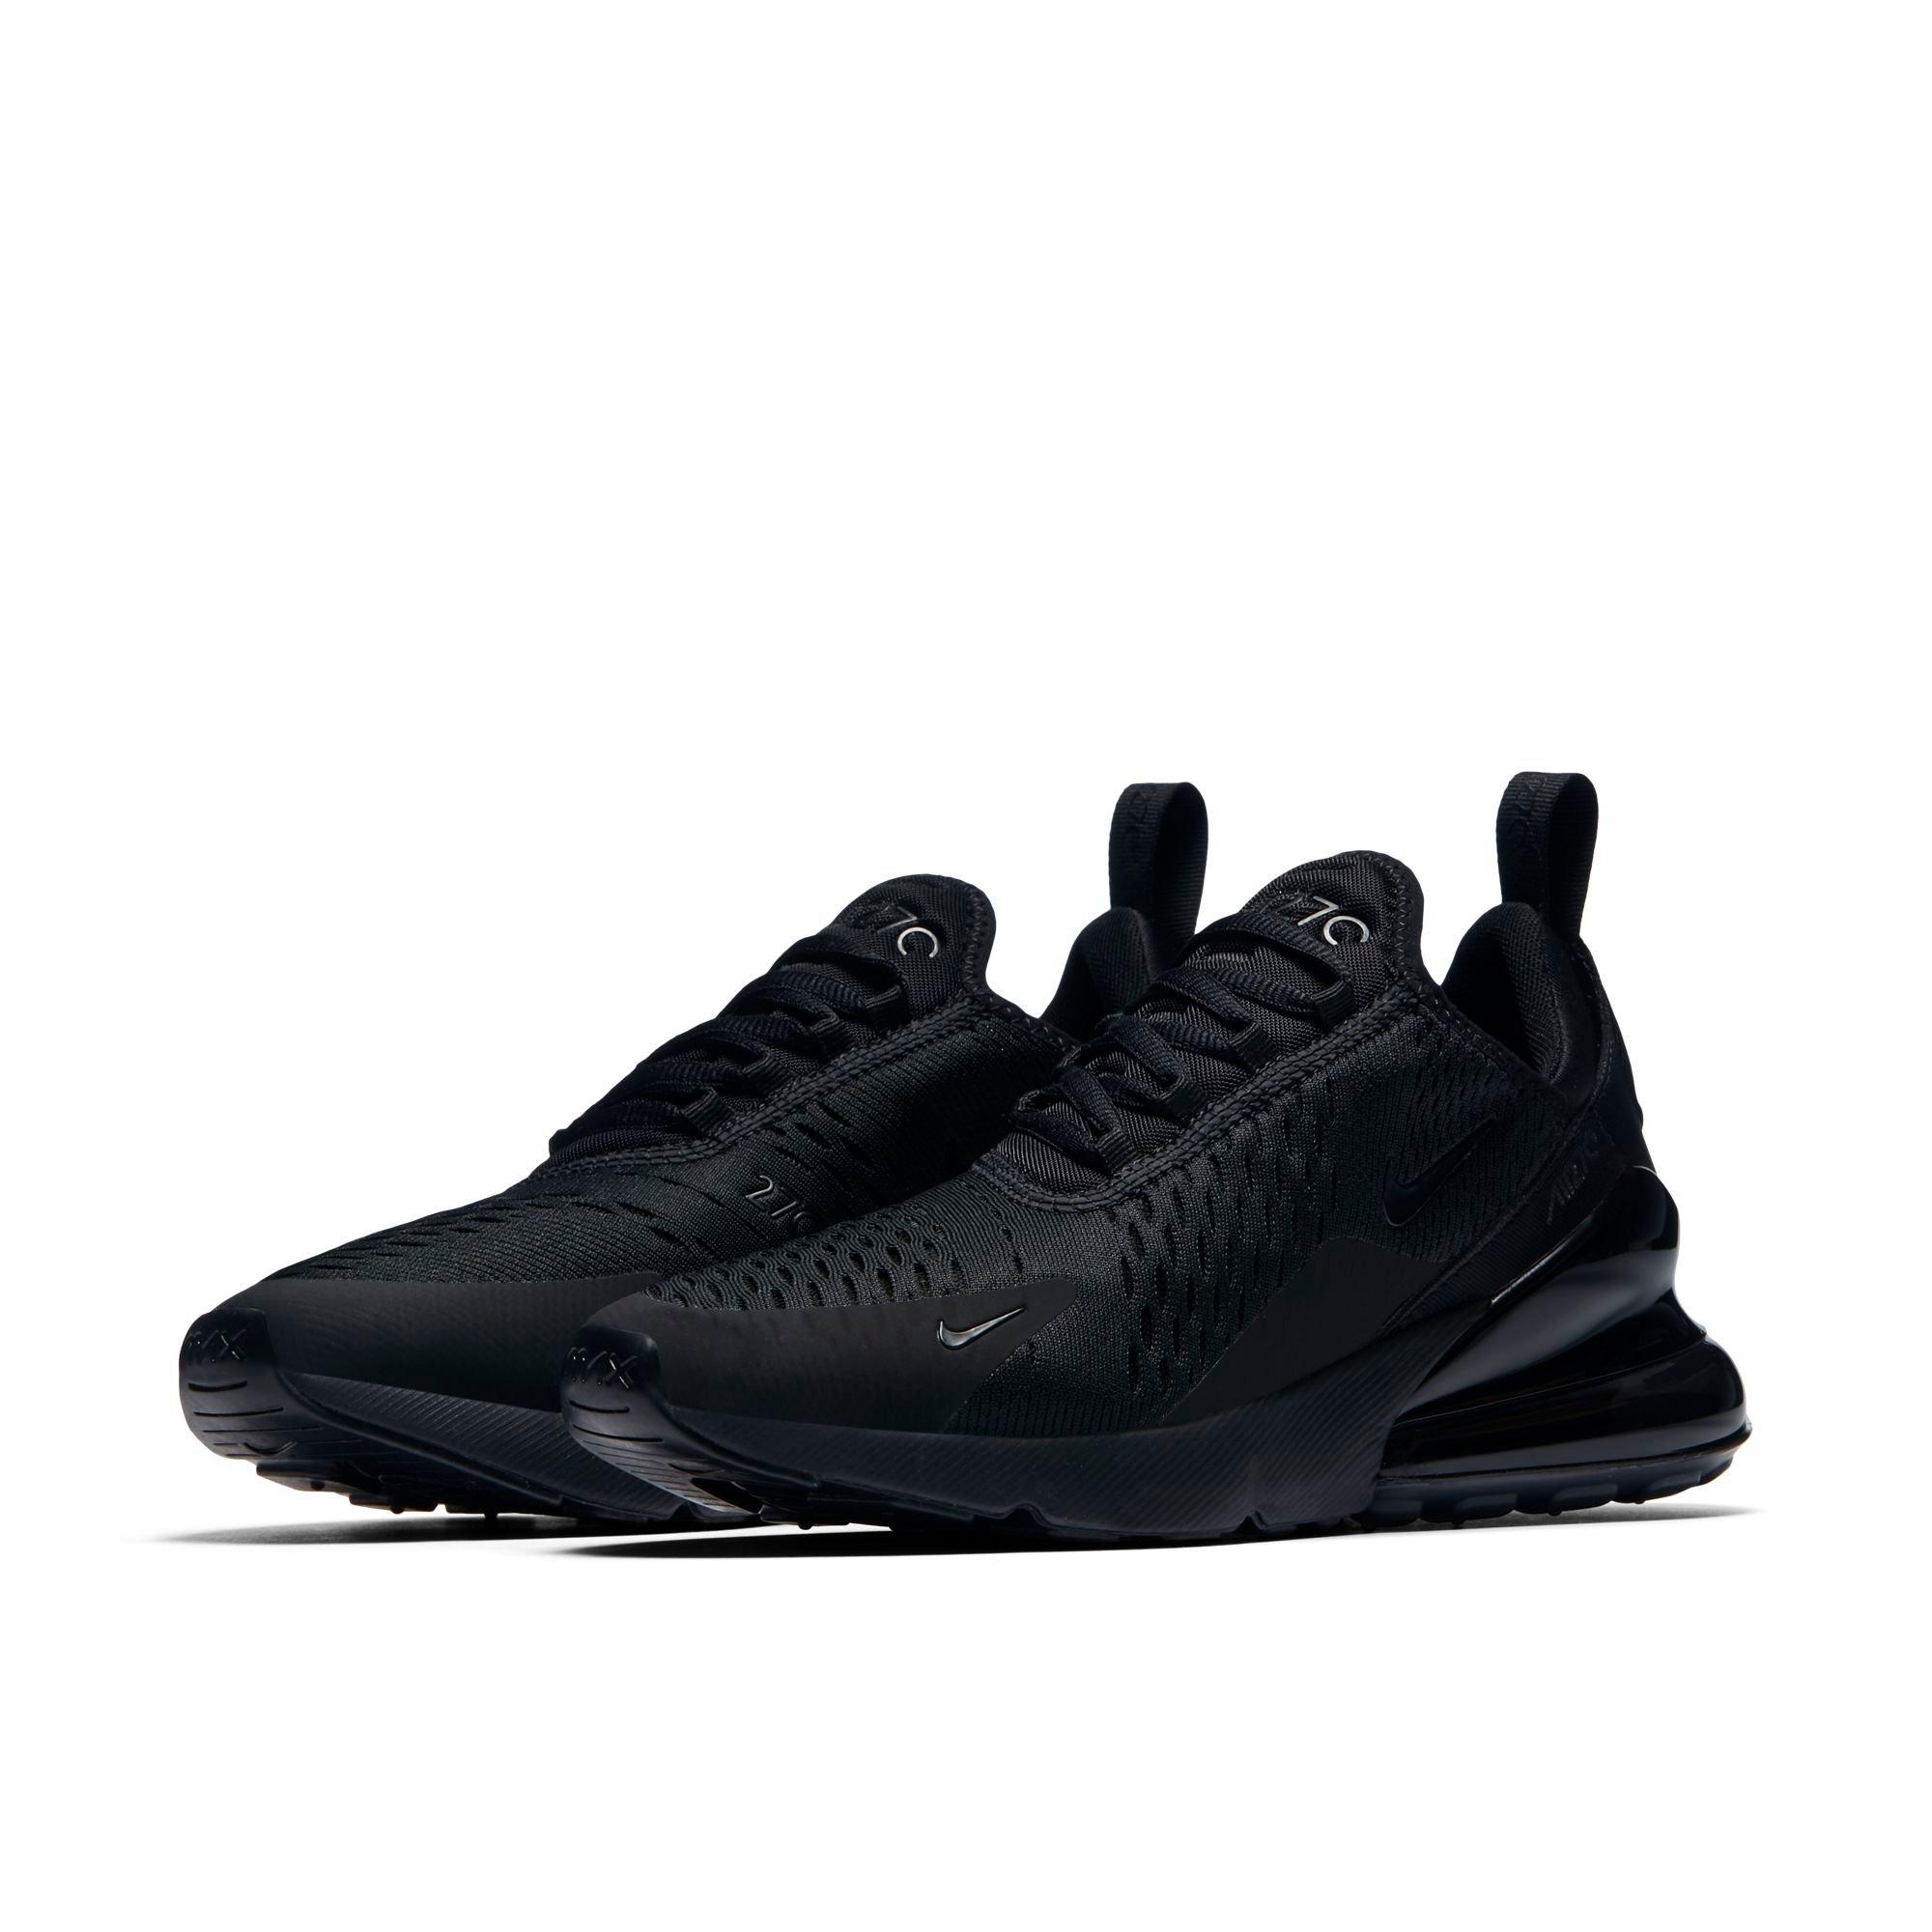 Nike Women's Air Max 270 Casual Shoes, Black - Size 7.0